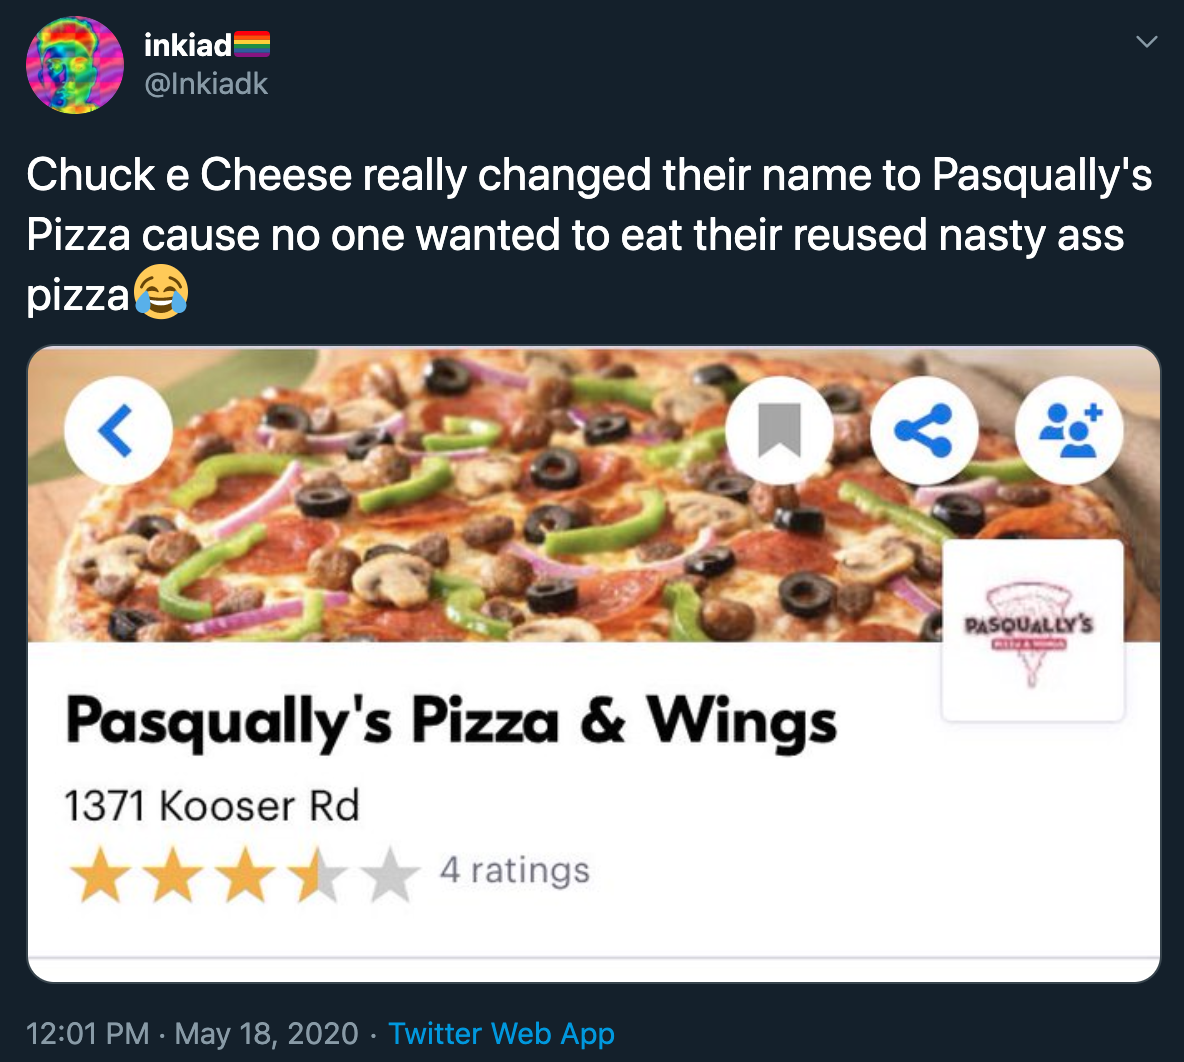 Chuck e Cheese really changed their name to Pasqually's Pizza cause no one wanted to eat their reused nasty ass pizza